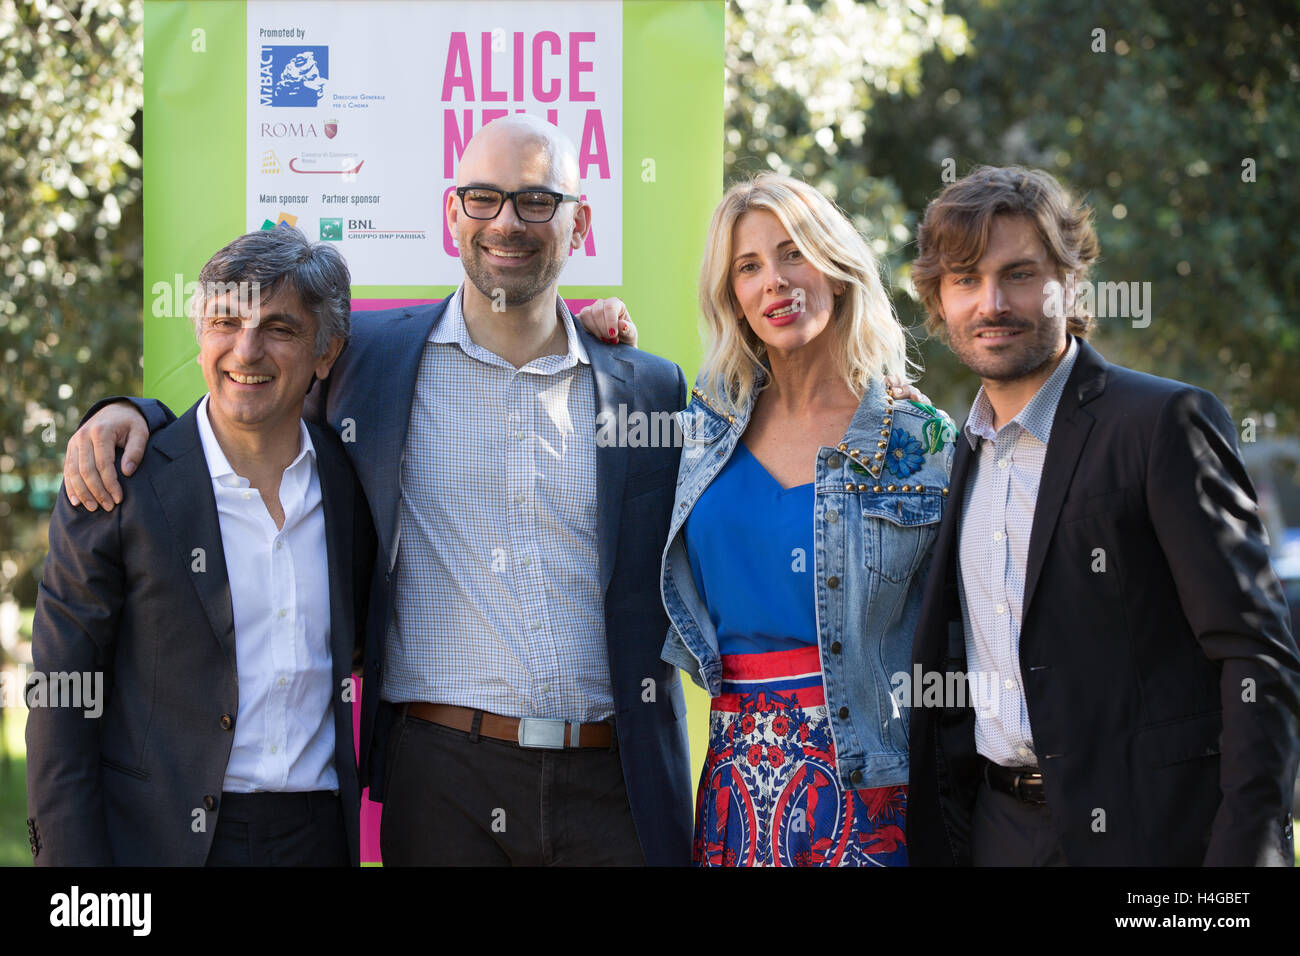 Rome, Italy. 16th October 2016. Federico Russo, Alessia Marcuzzi, Vincenzo Salemme and the director Doug Sweetland at photocall and red carpet for the film 'Cicogne in Missione' at Rome Film Festival 2016 Credit: Luigi de Pompeis/Alamy Live News Stock Photo